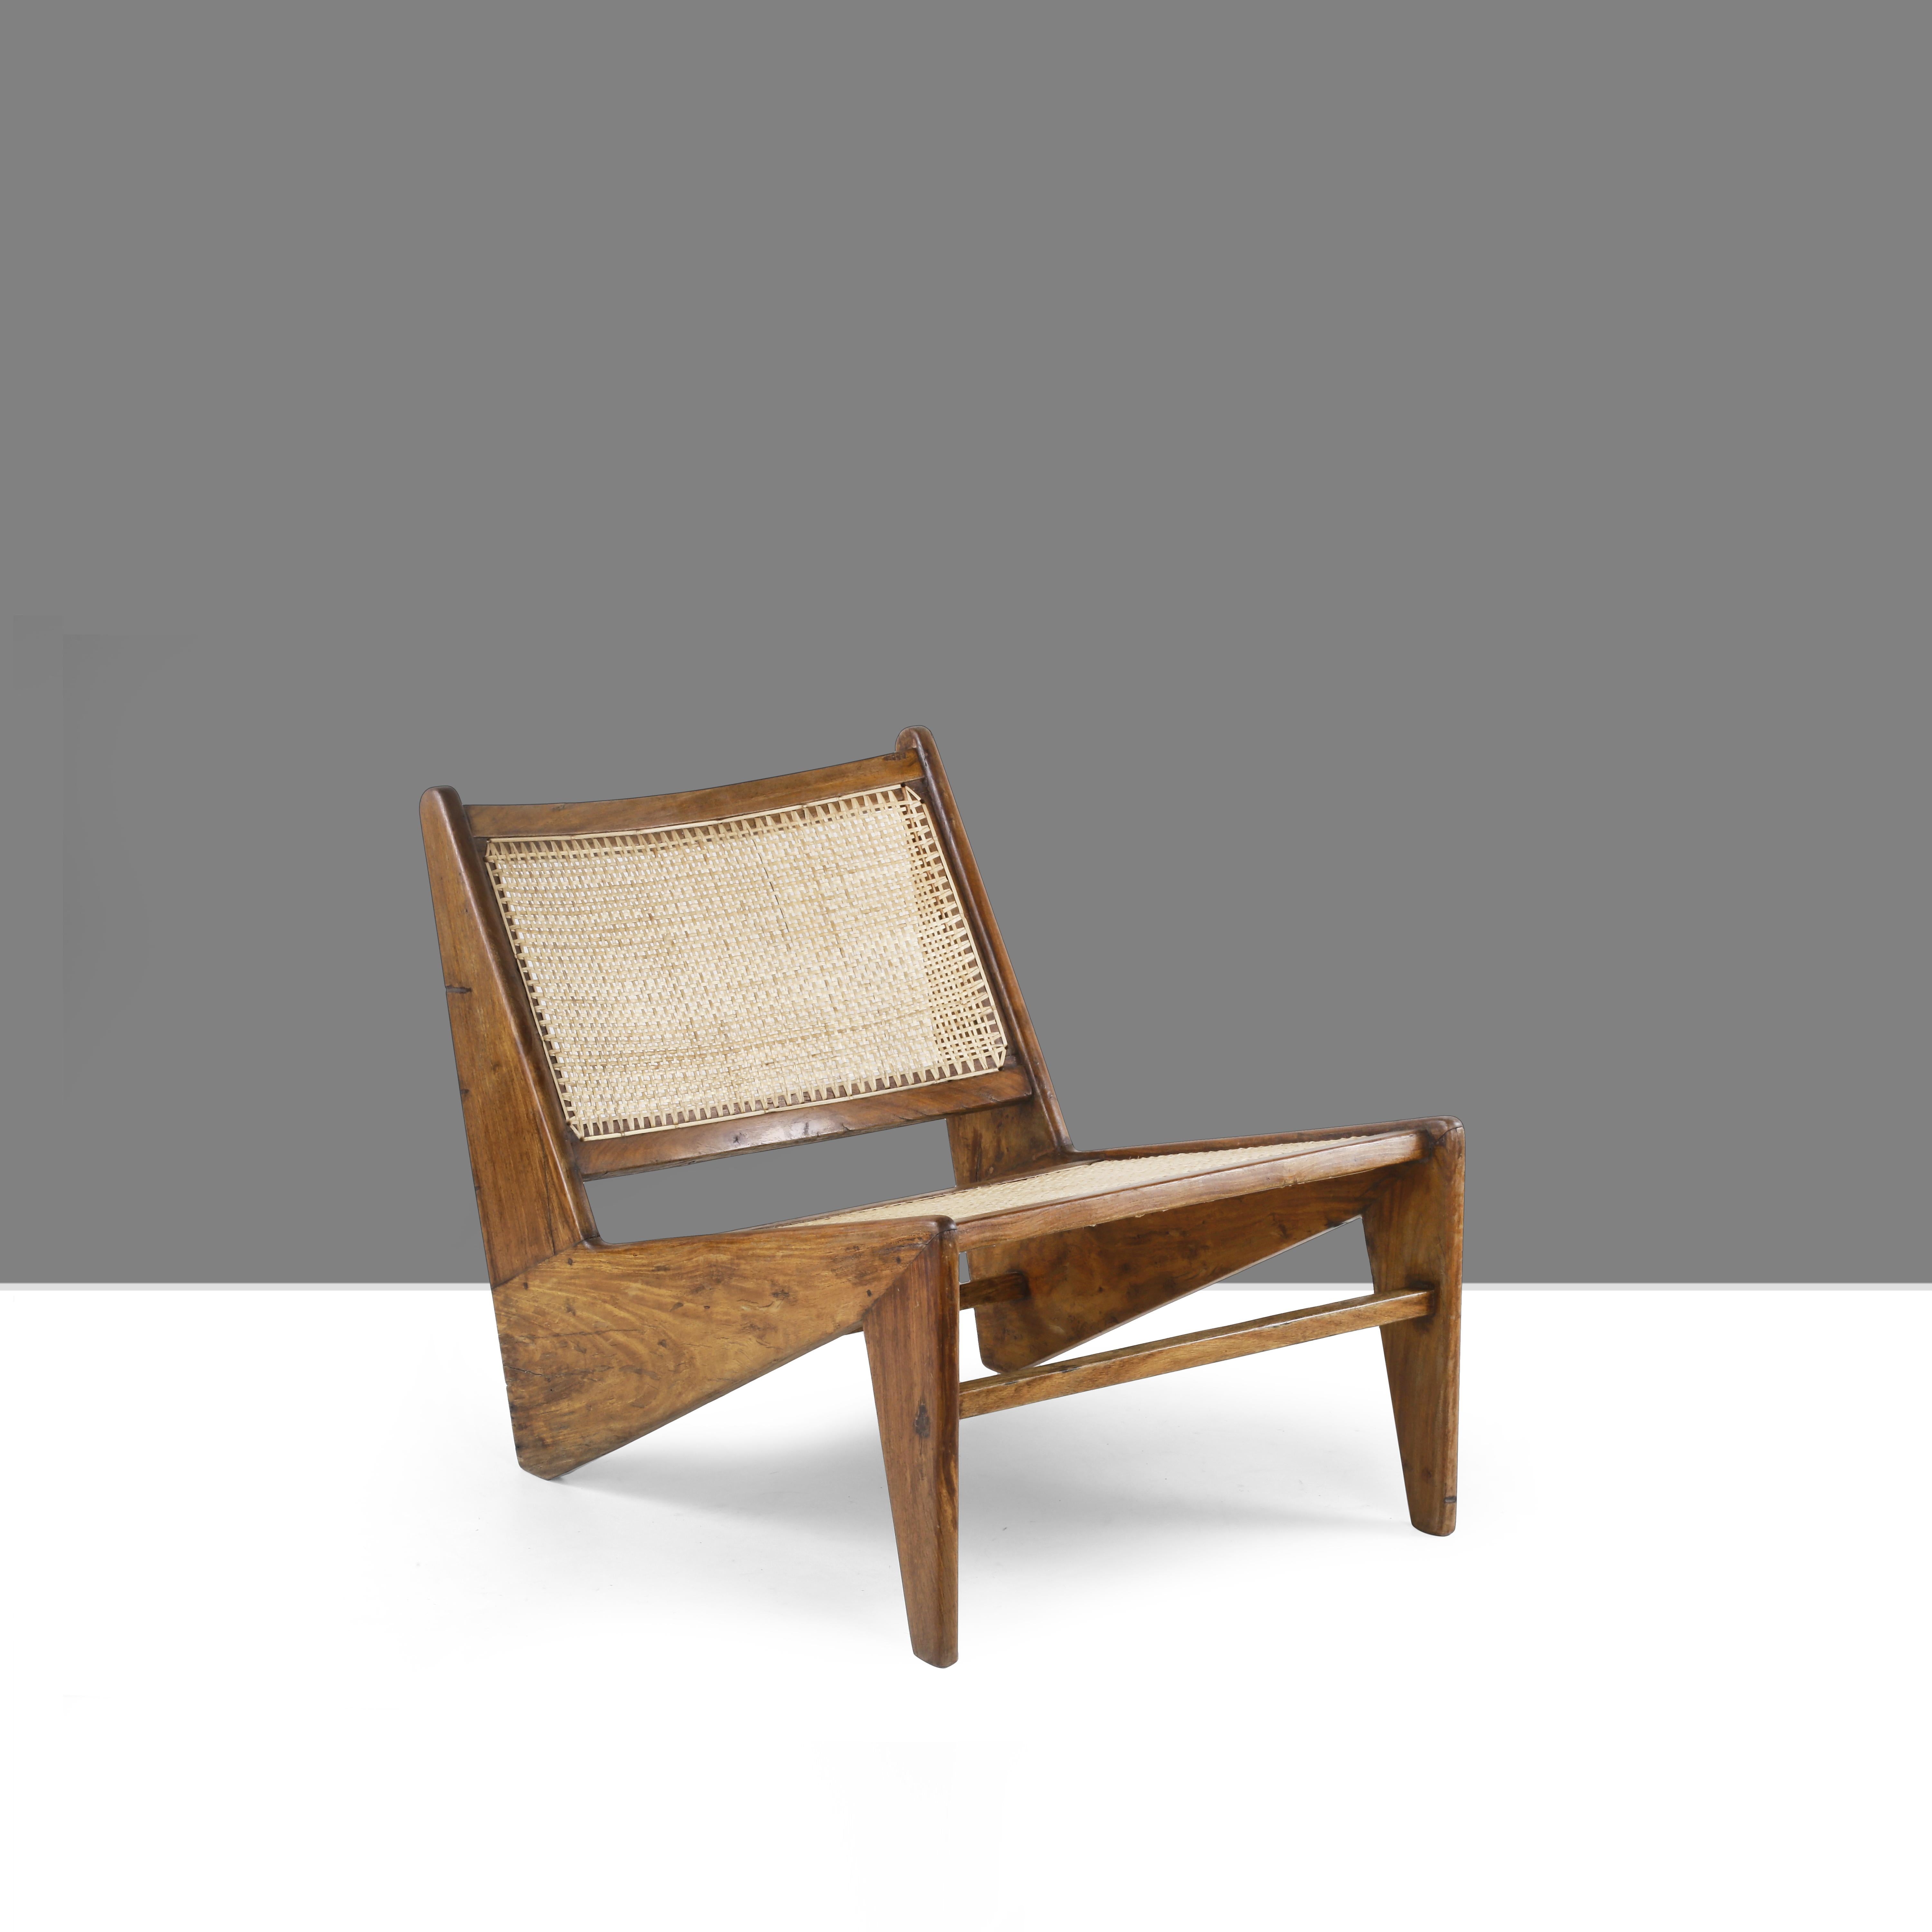 The kangaroo chair has a very simple shape, almost like a wave. We love this combination of this strong wood frame filled with the thin caning. These contrasts make this object so unique. The details of this chair are stunning, the outline gets